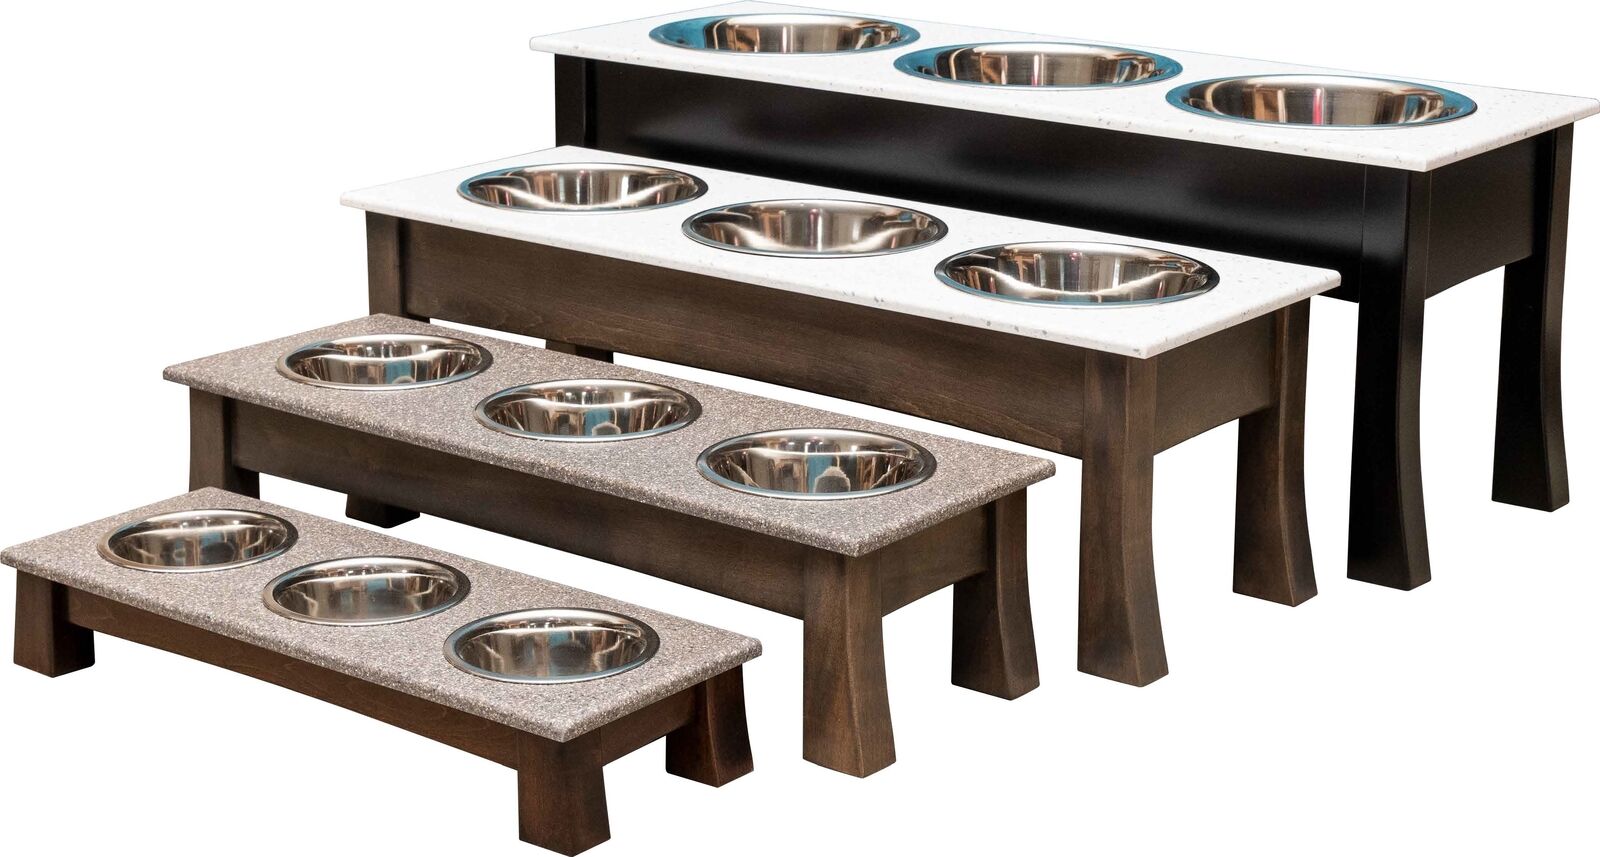 TRIPLE Dish MODERN ELEVATED DOG FEEDER - Brown MAPLE Wood CORIAN Top and Bowls